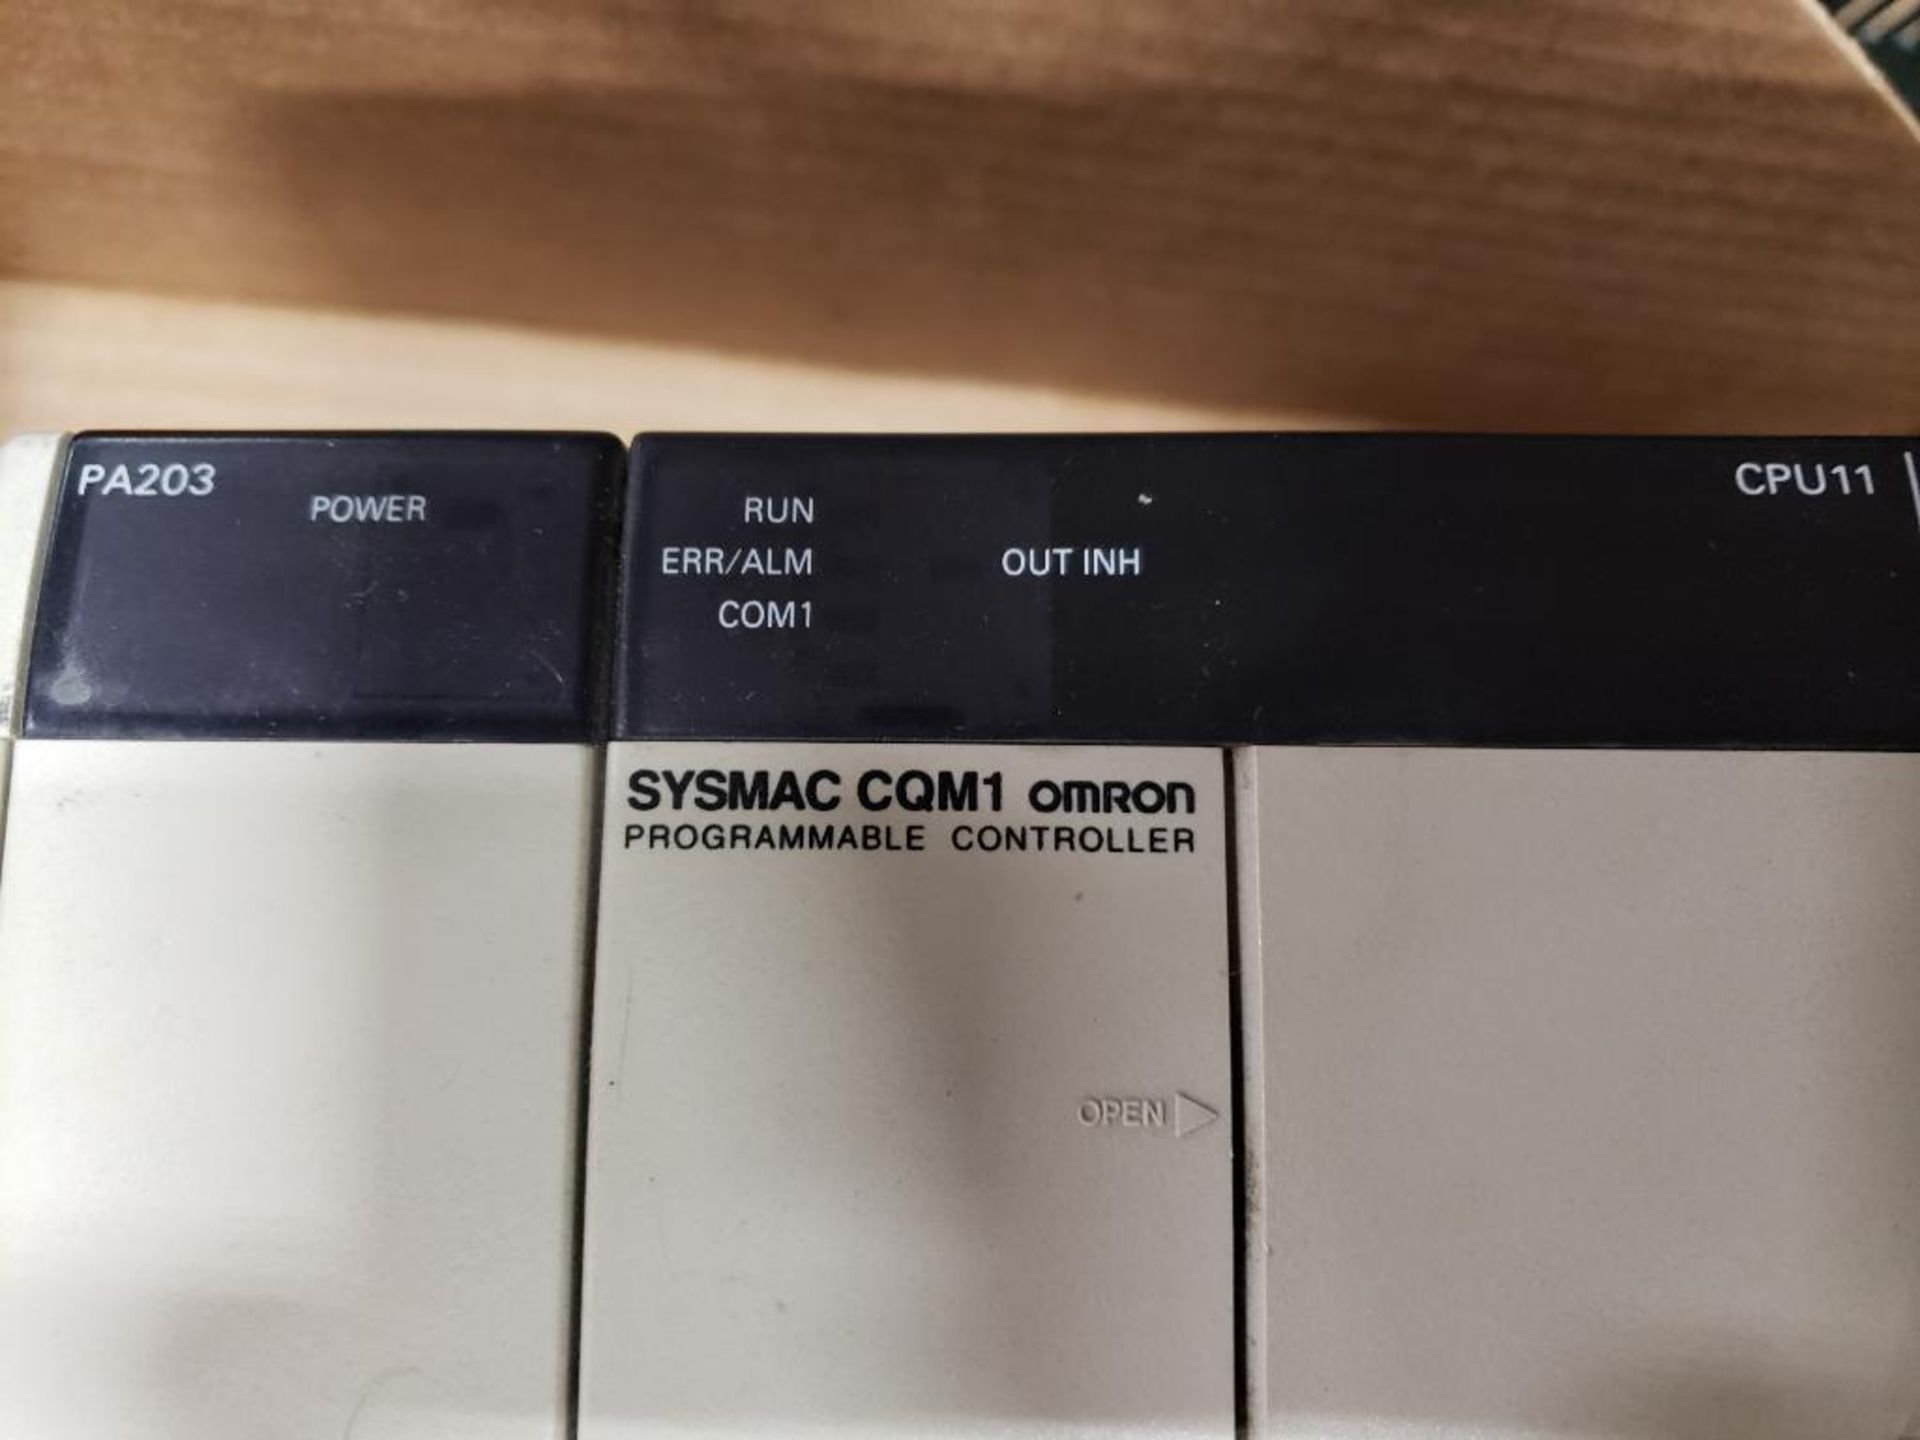 Omron SYSMAC CQM1 programmable controller rack. - Image 5 of 9